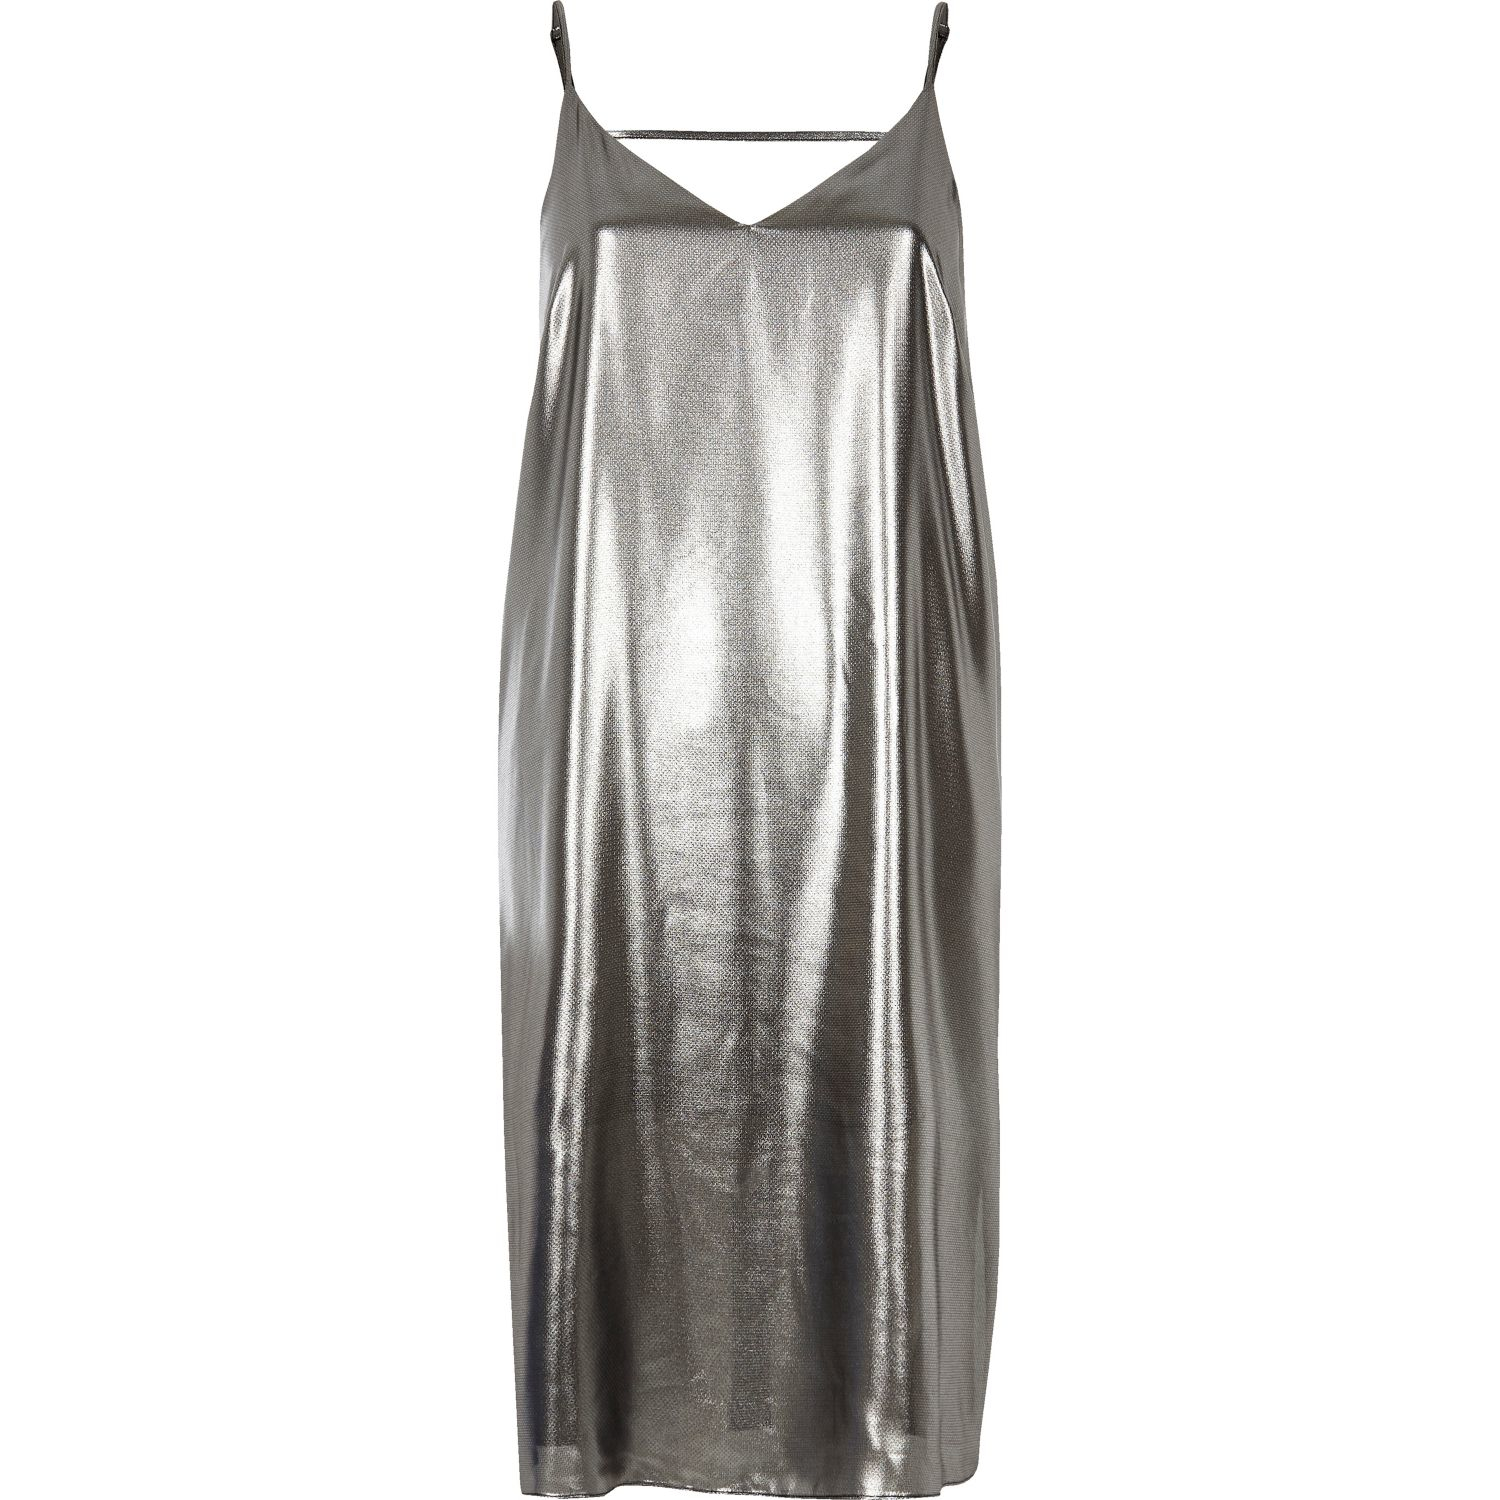 Silver Dress River Island : New Fashion Collection